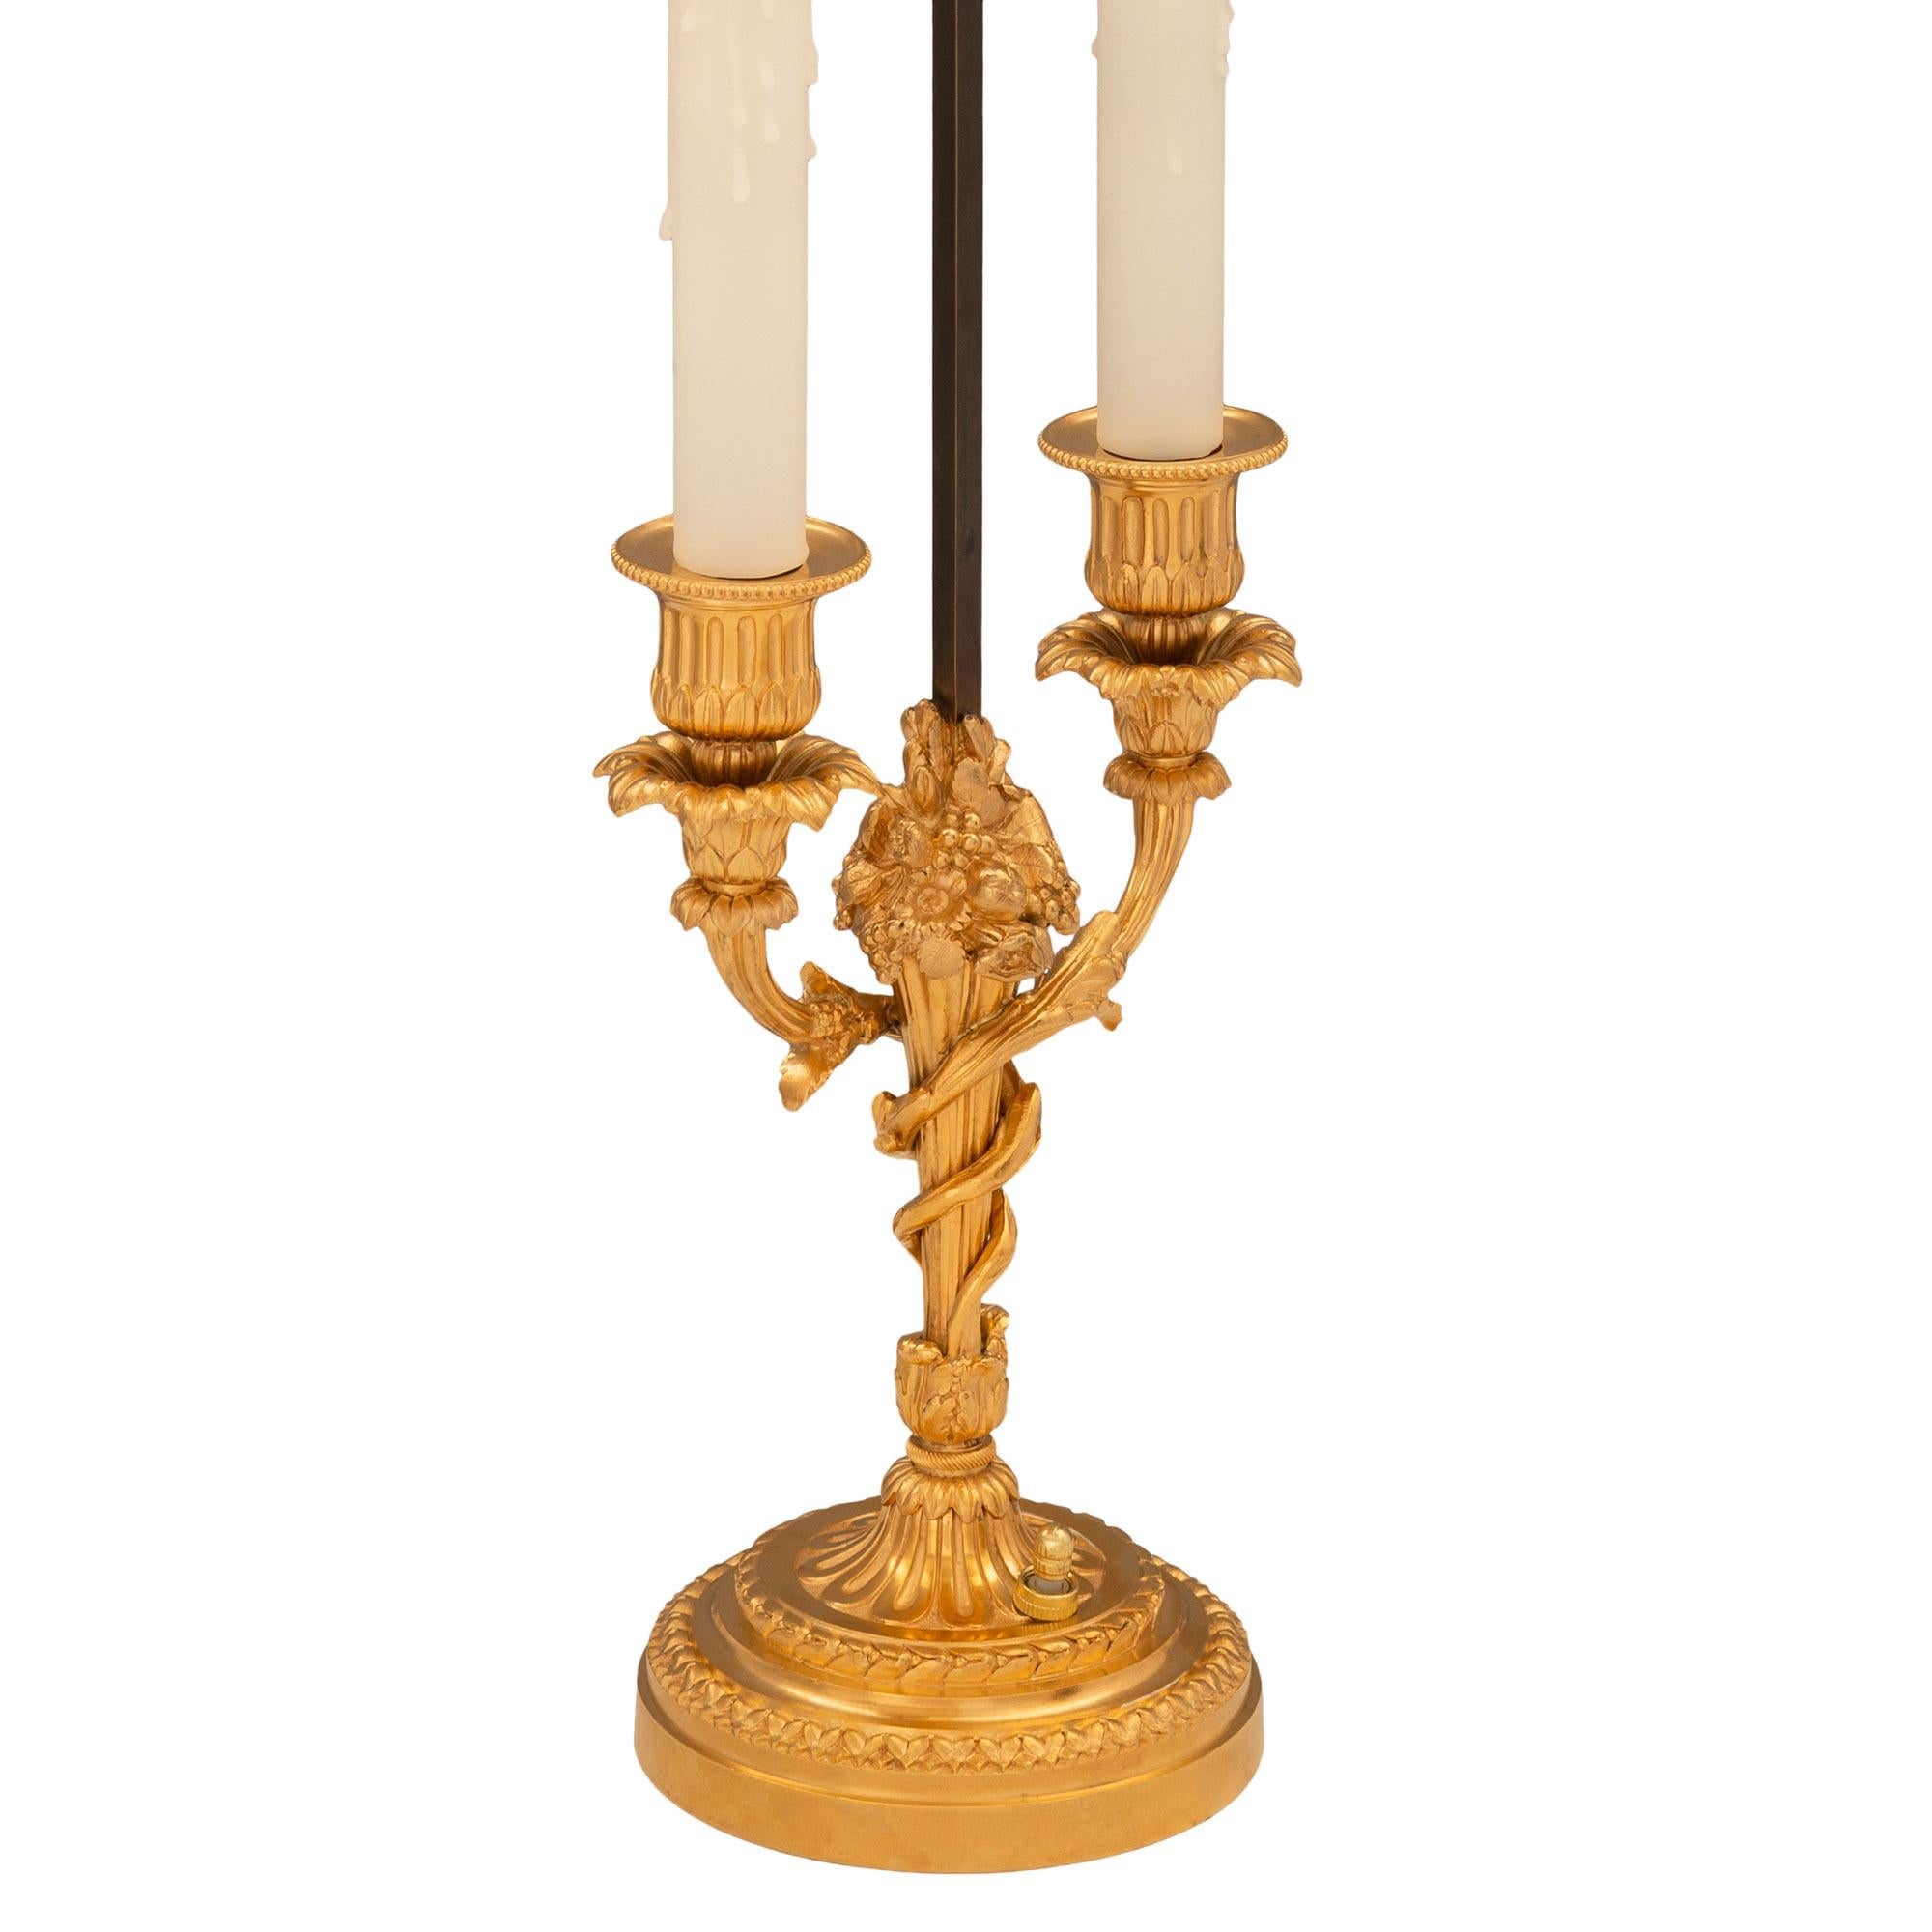 A striking and most elegant pair of French 19th century Louis XVI st. ormolu lamps signed Vian. Each two arm lamp is raised by a circular base with a fine stepped mottled design decorated with beautiful wrap around foliate bands. The tapered fluted